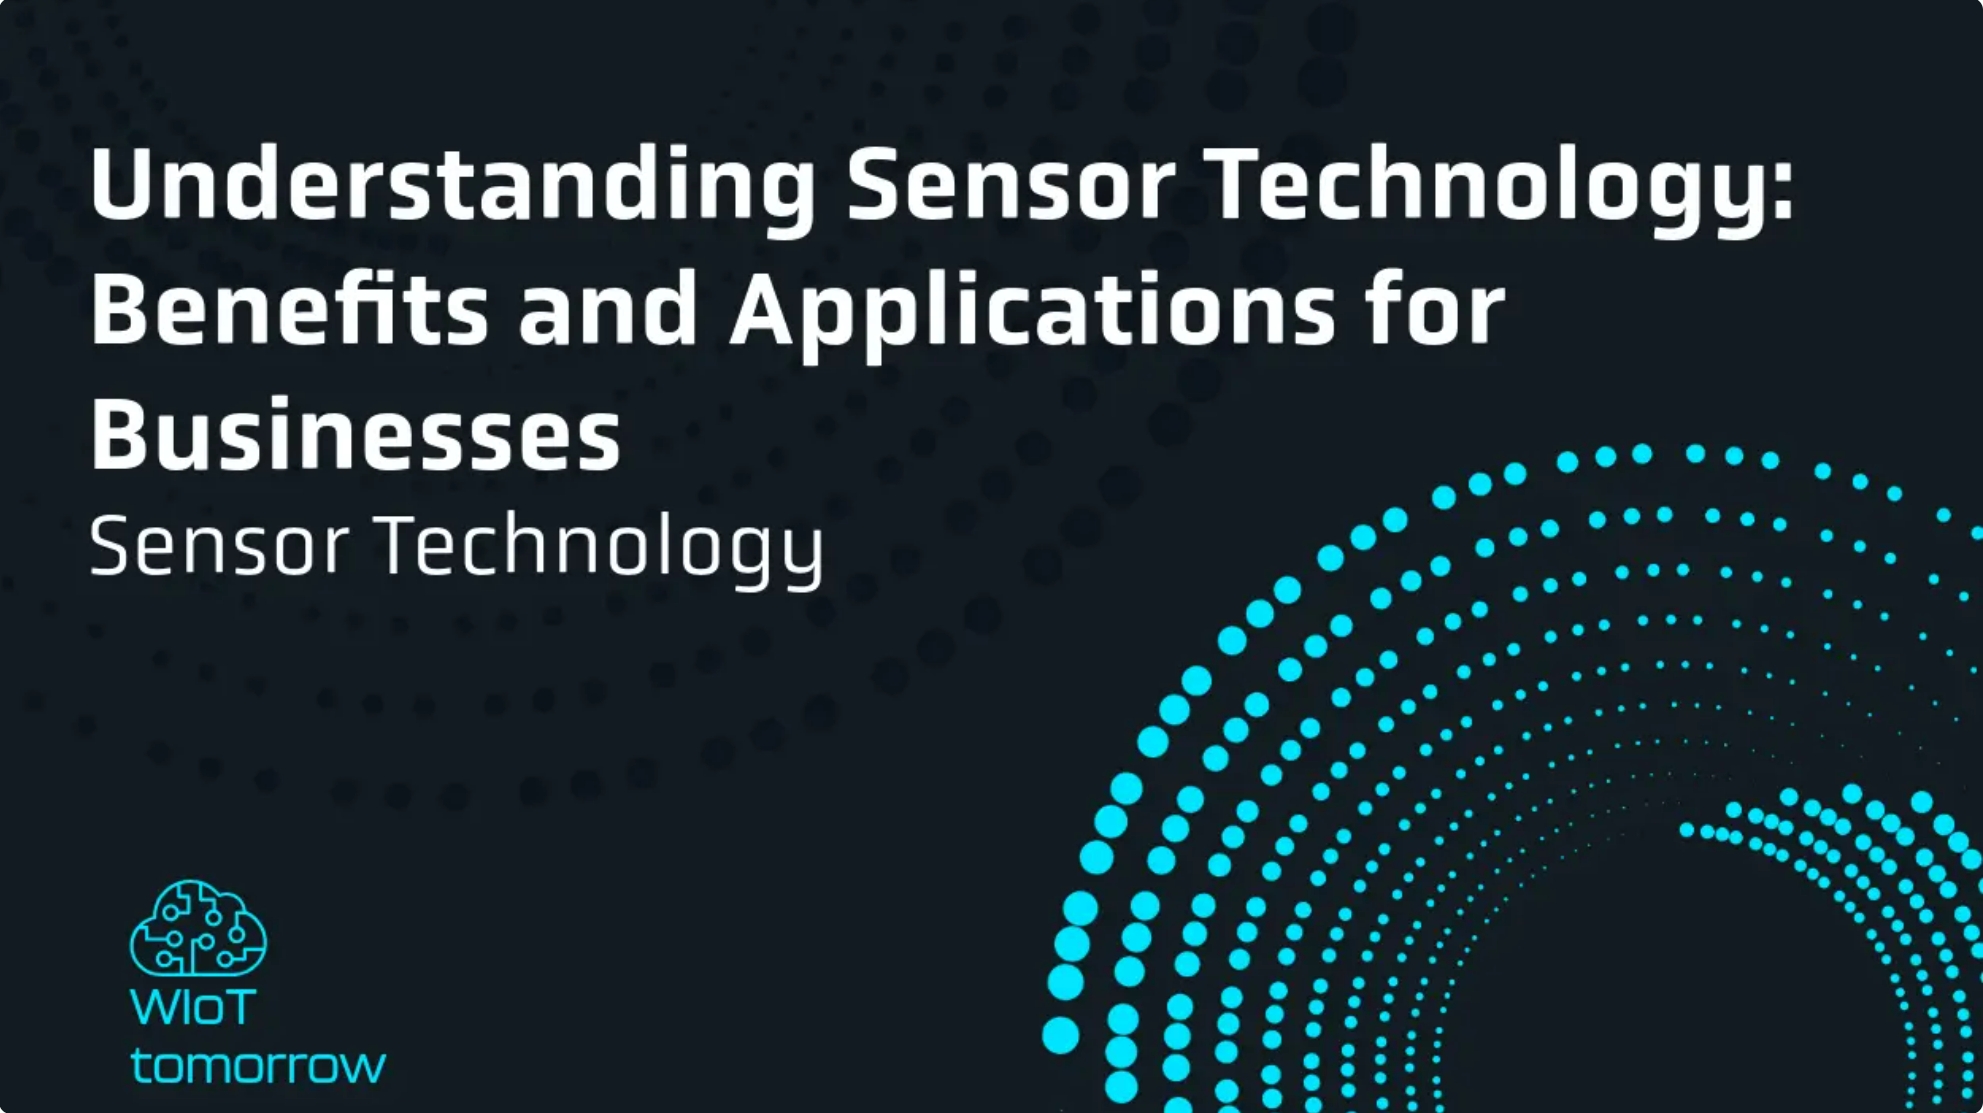 Sensors and IoT: Benefits and Applications for Companies